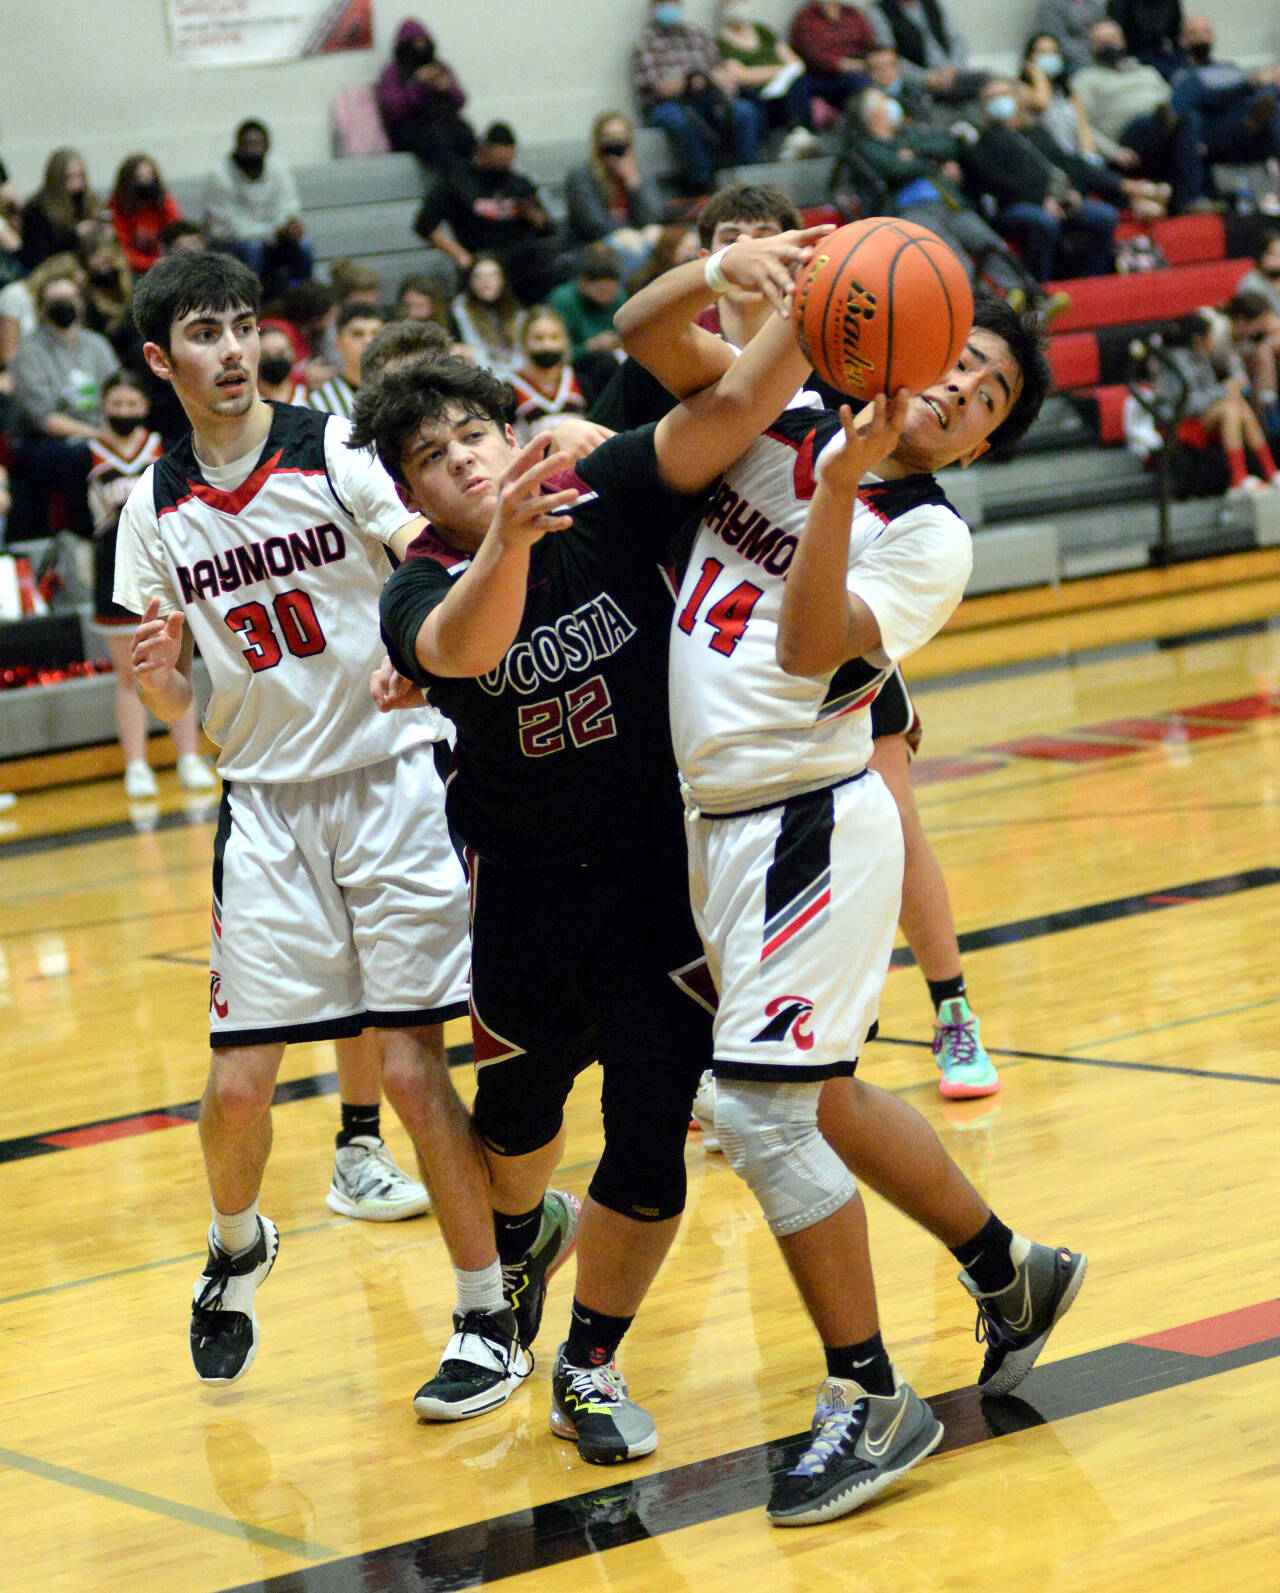 RYAN SPARKS | THE DAILY WORLD Ocosta’s Xander Prigmore (22) and Raymond Adrian Quintana (14) compete for a rebound during the Seagulls 87-53 victory on Wednesday at Raymond High School.